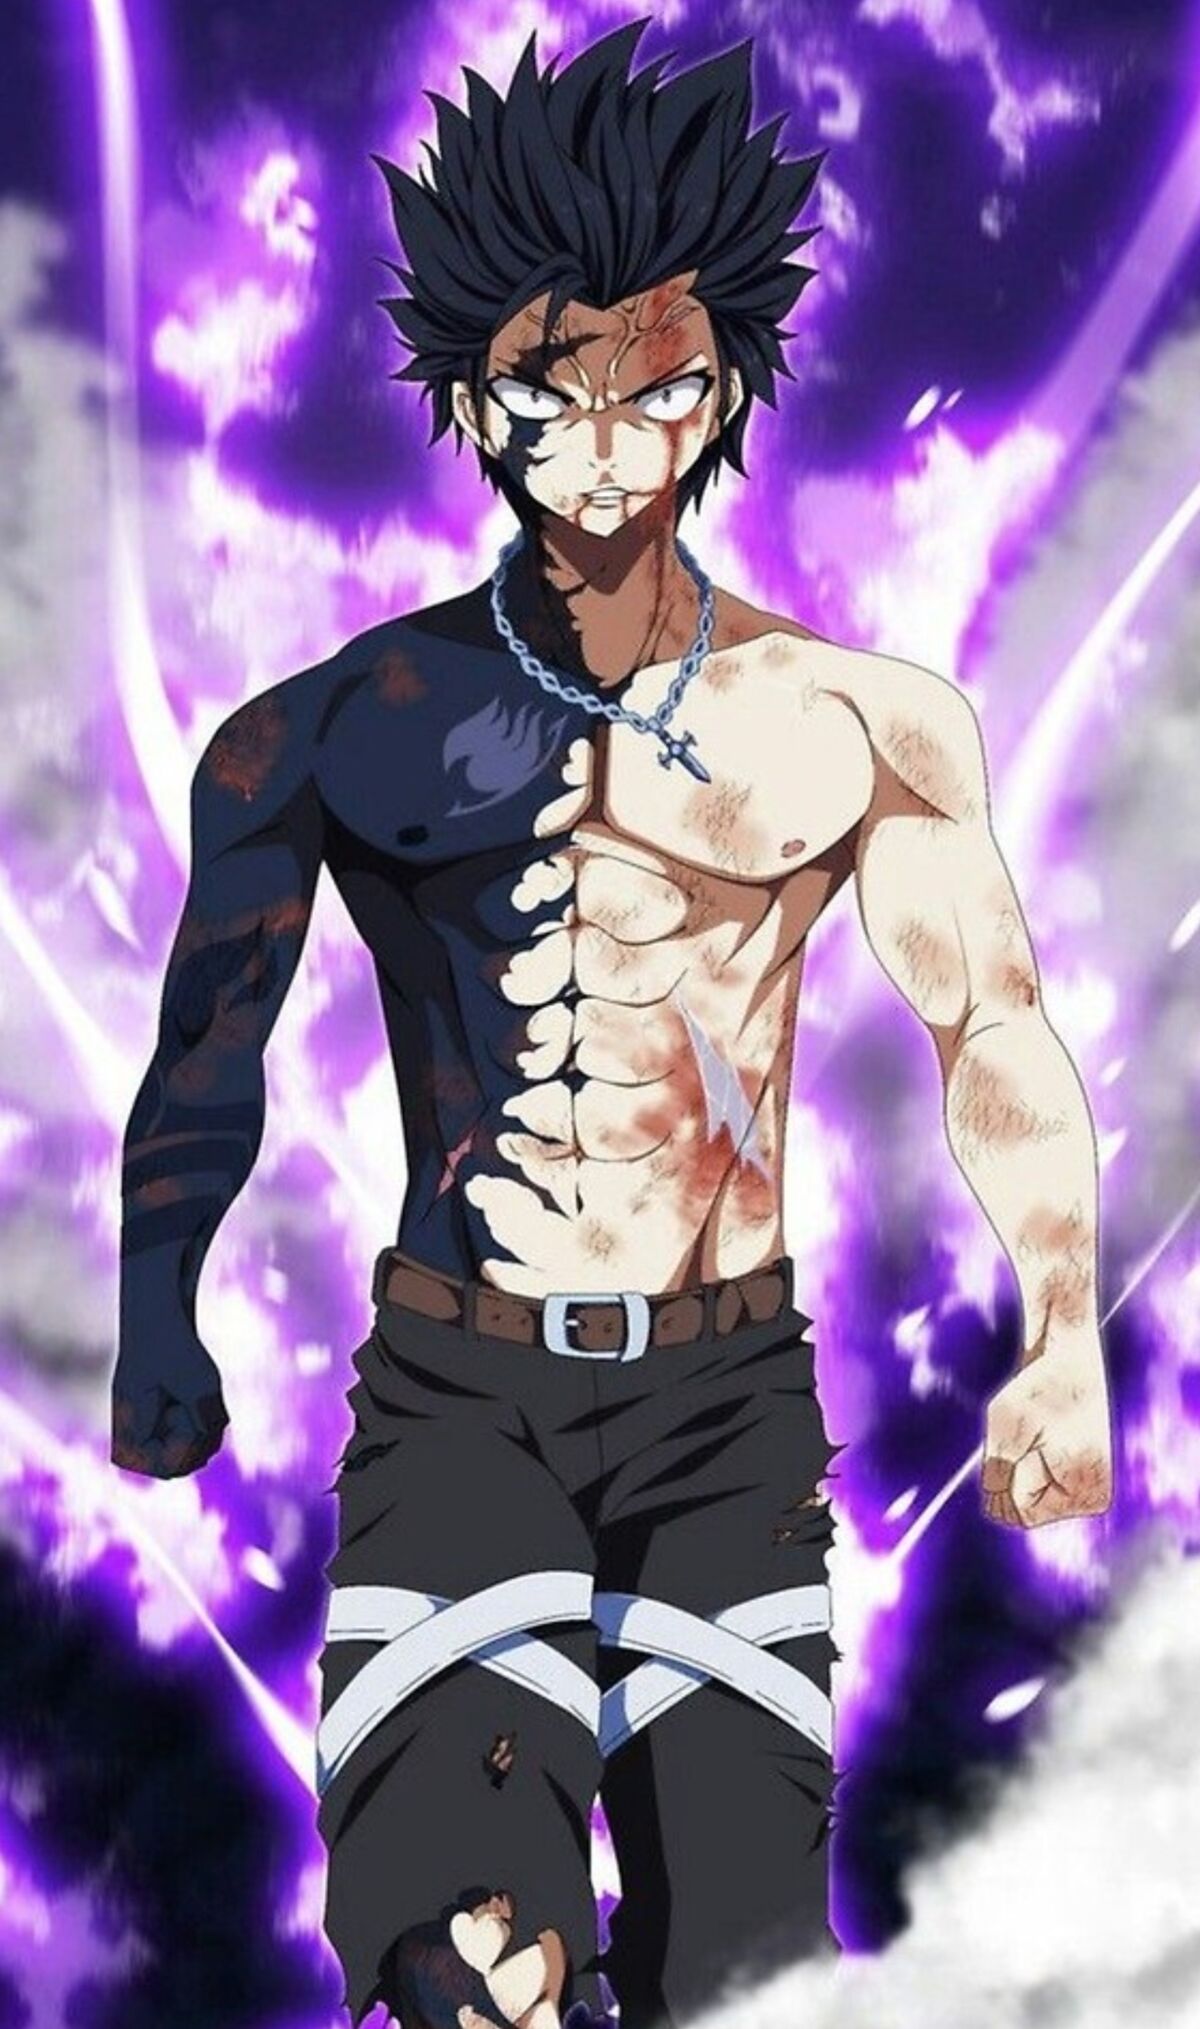 Gray Fullbuster The Ice Mage Who Warmed Our Hearts